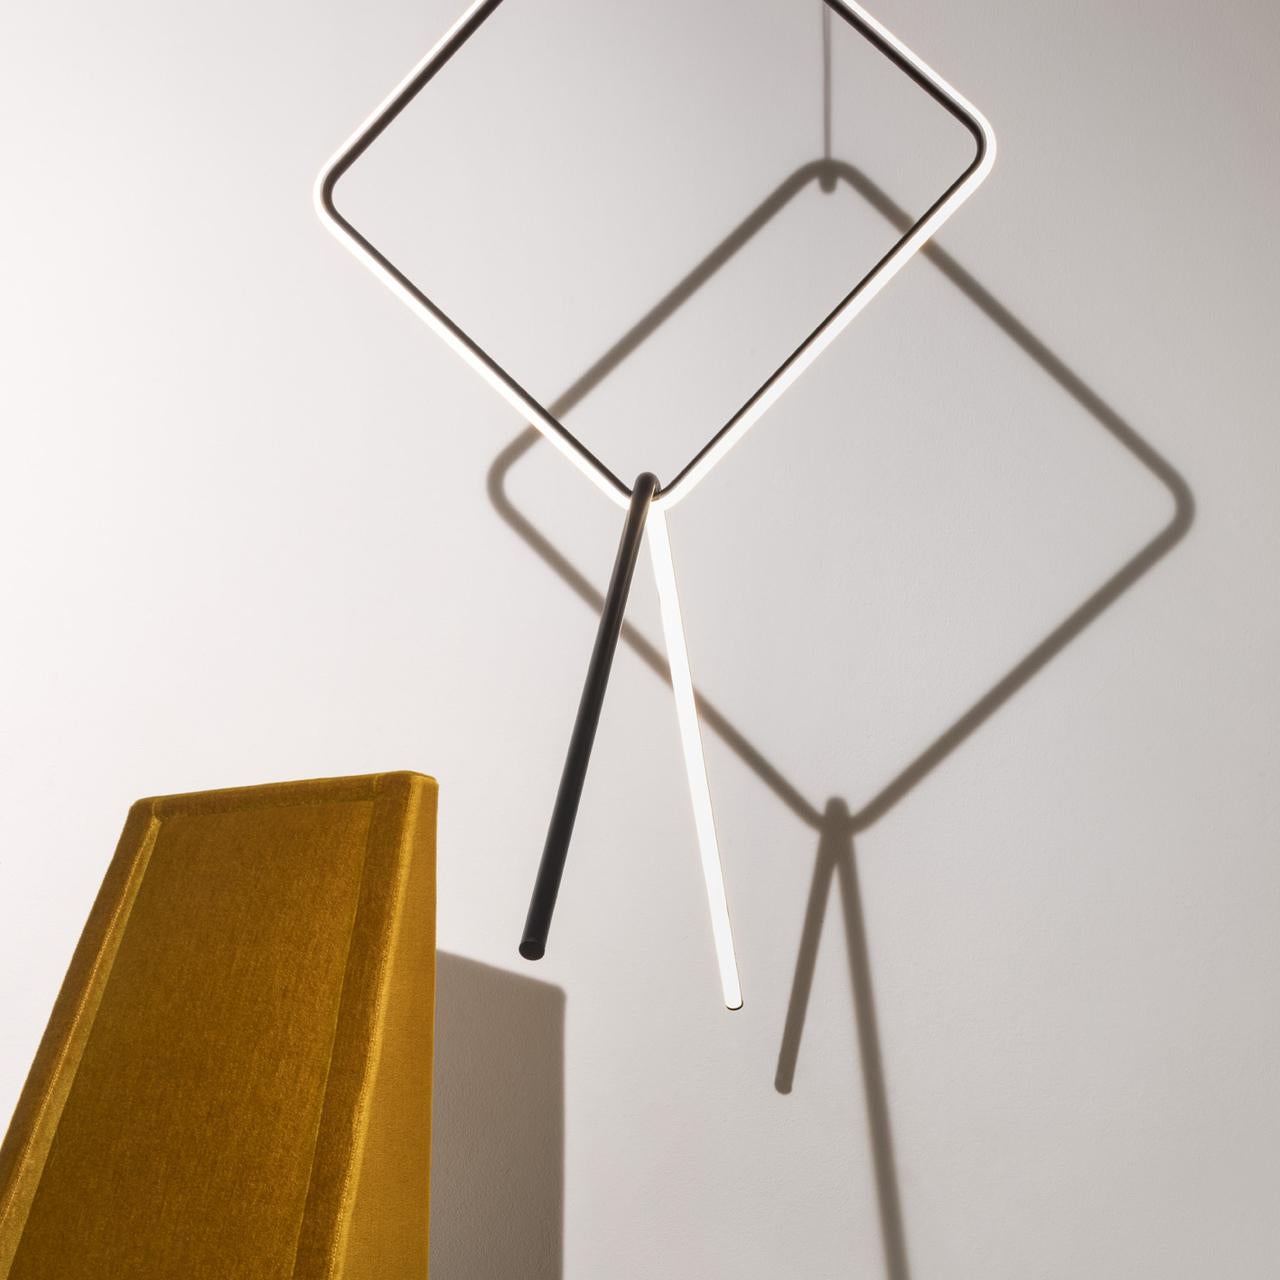 Italian FLOS Medium Circle and Small Square Arrangements Light by Michael Anastassiades For Sale